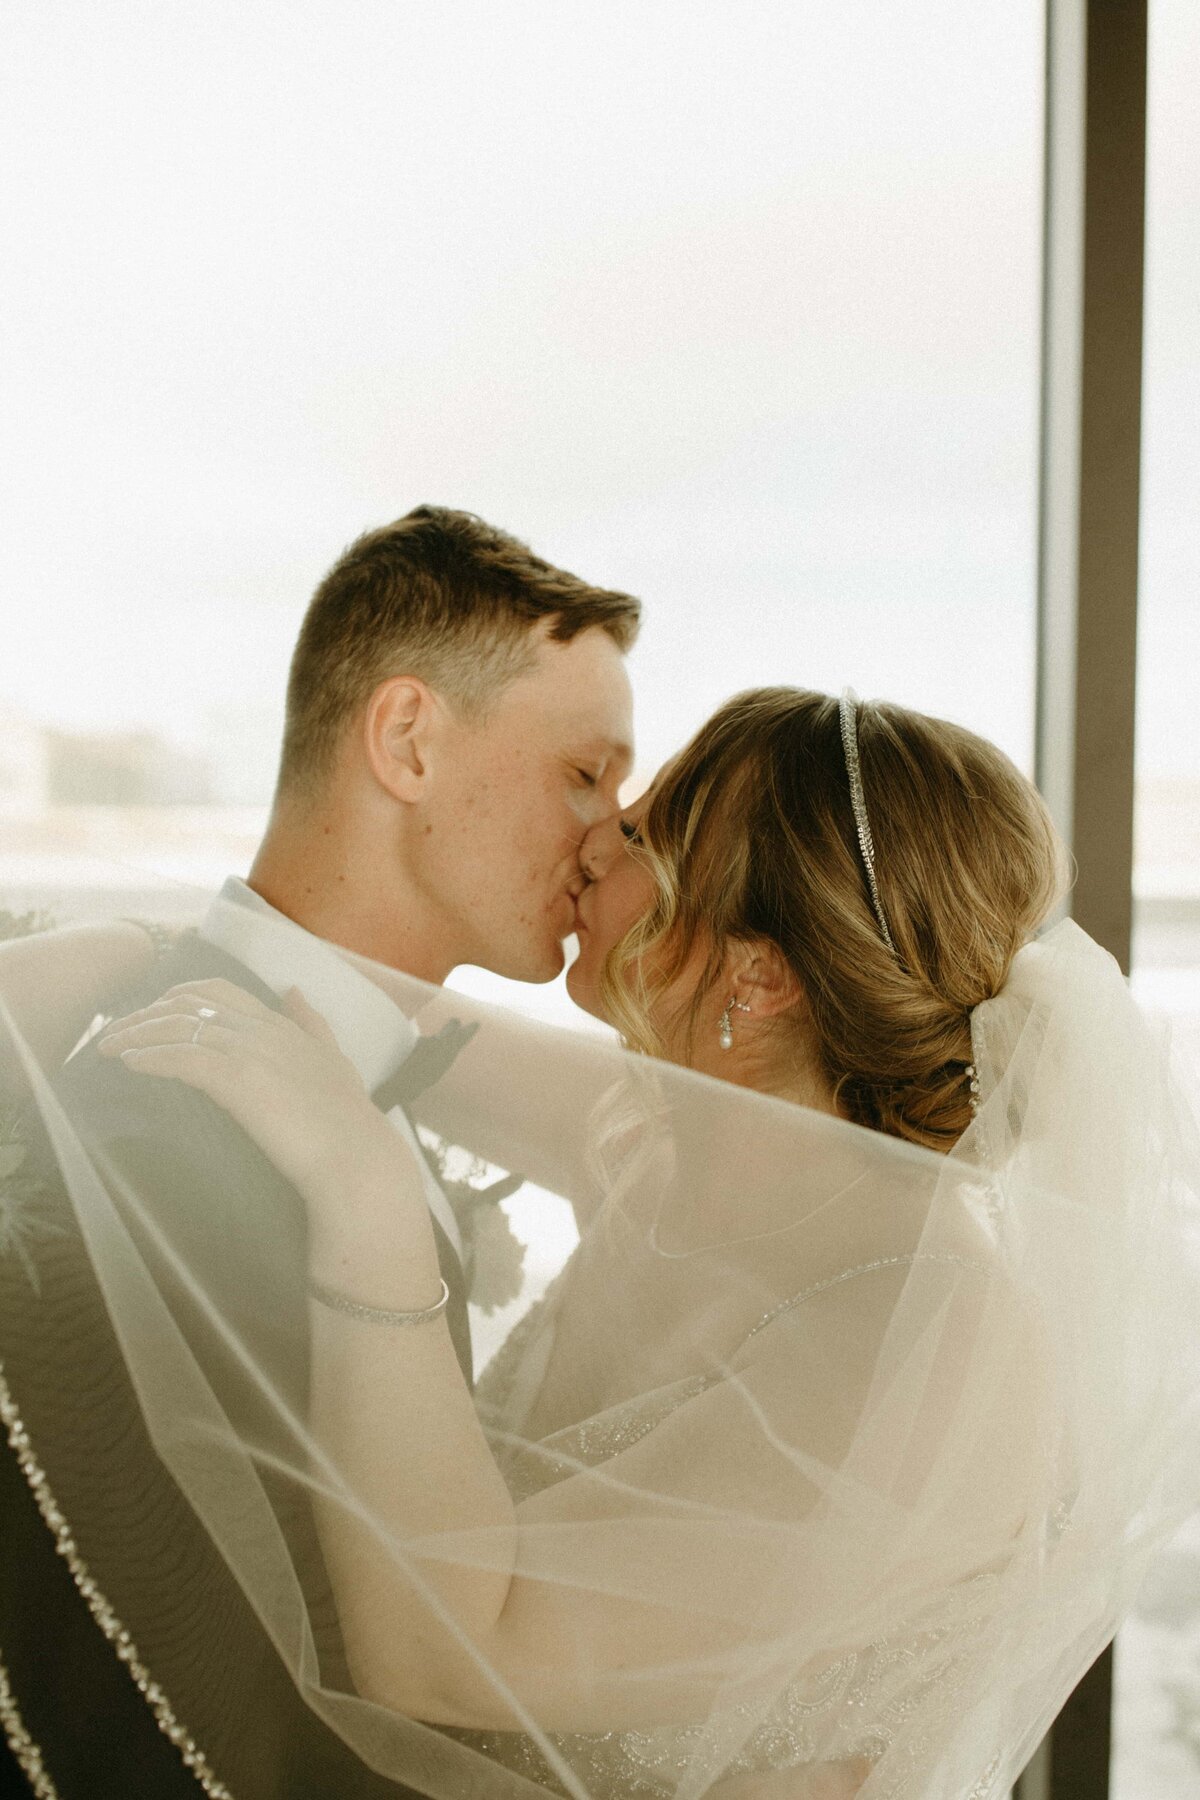 A bride and groom sharing a romantic kiss, with the bride's veil flowing gracefully around them, indoors at a winery with soft natural light illuminating the scene.